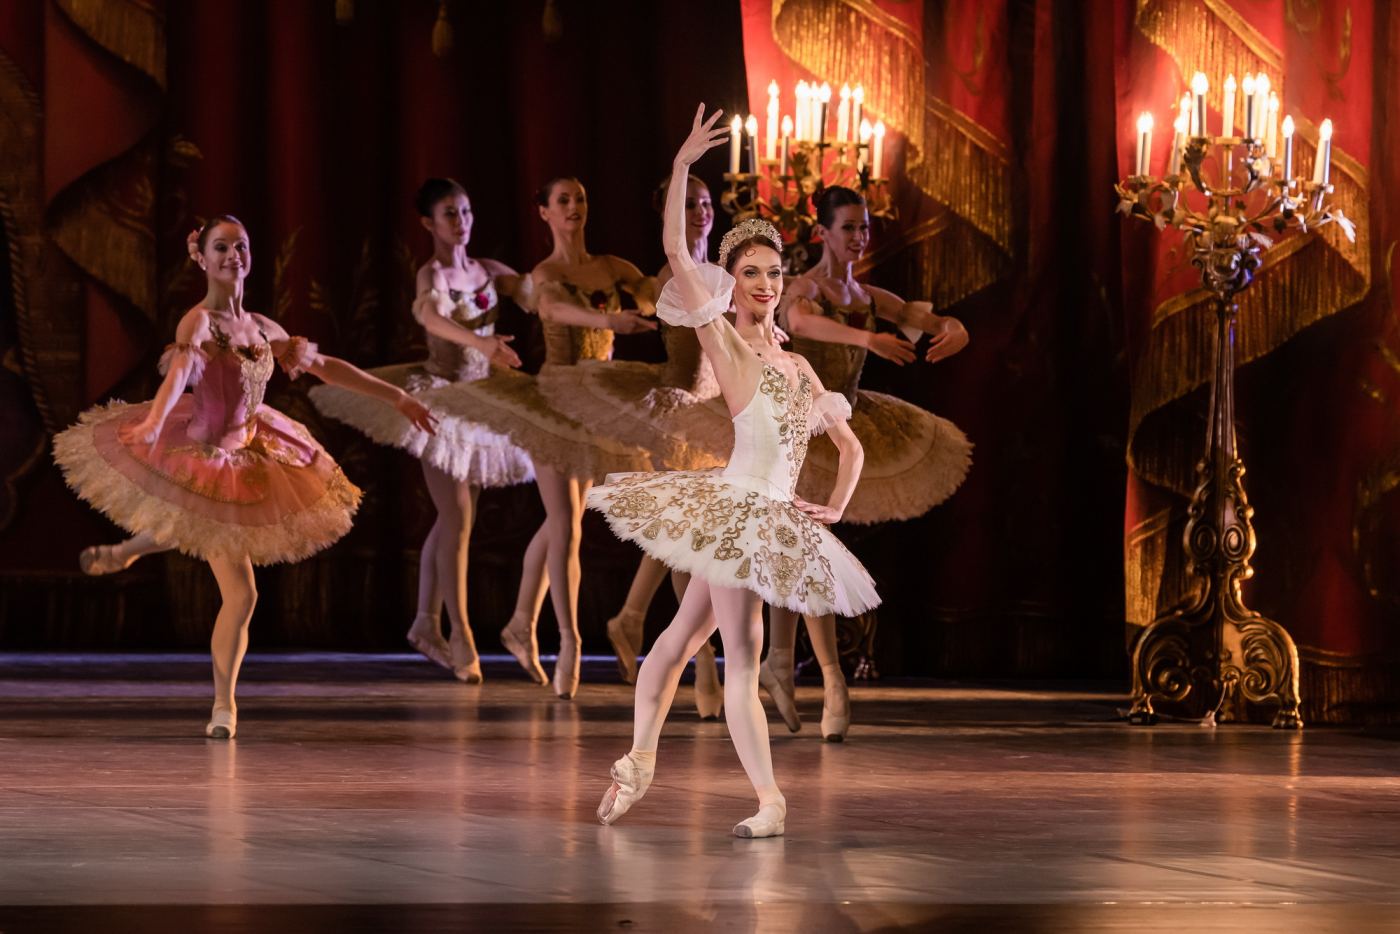 16. T.Melnik and ensemble, “Paquita Suite” by T.Solymosi, A.Mirzoyan, and I.Prokofieva after M.Petipa; Ballet of the Hungarian State Opera 2022 © A.Nagy / Hungarian State Opera